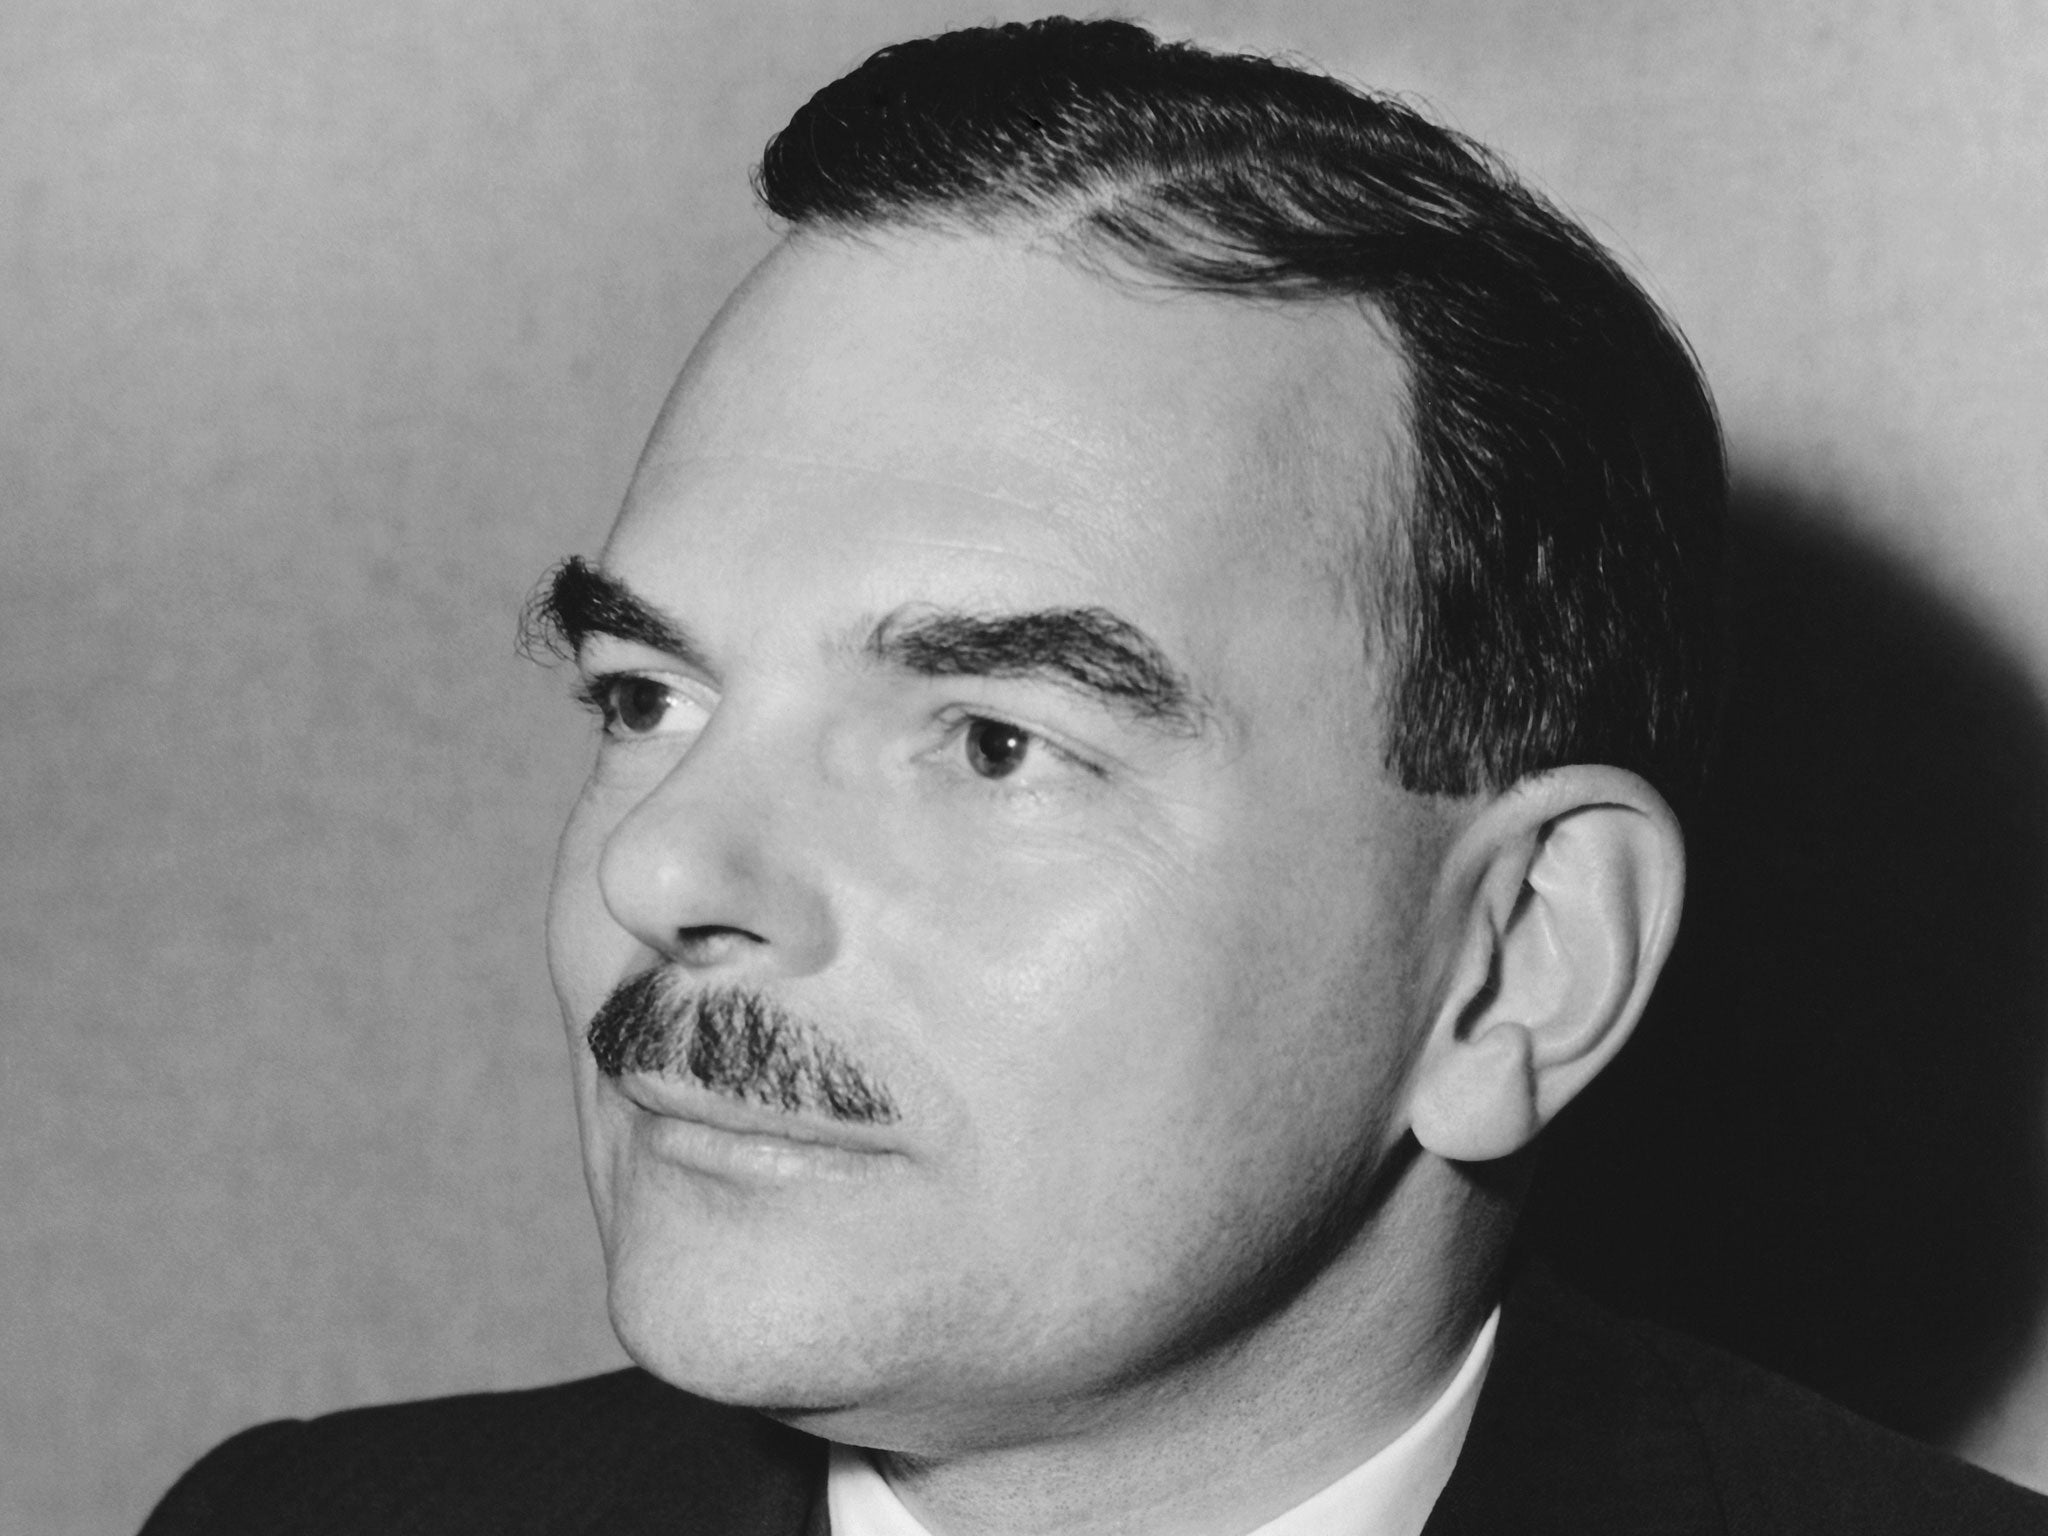 Oldstone-Moore argues that Thomas Dewey's moustache lost him the 1948 US Presidential election